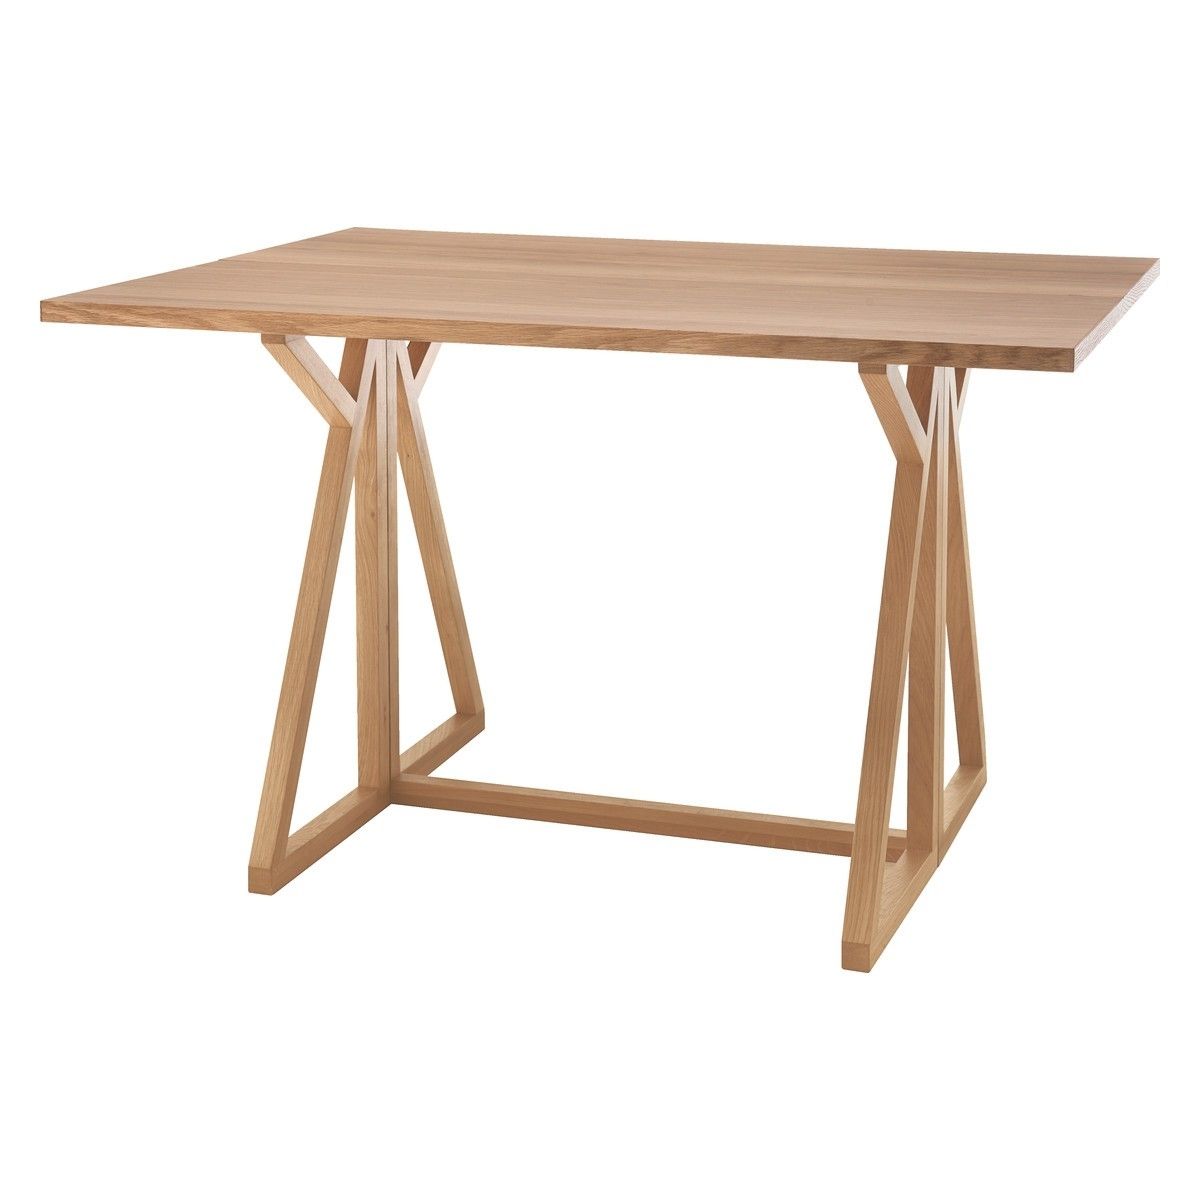 Buy Now At Habitat Uk With Most Popular 4 Seat Dining Tables (Photo 9 of 25)